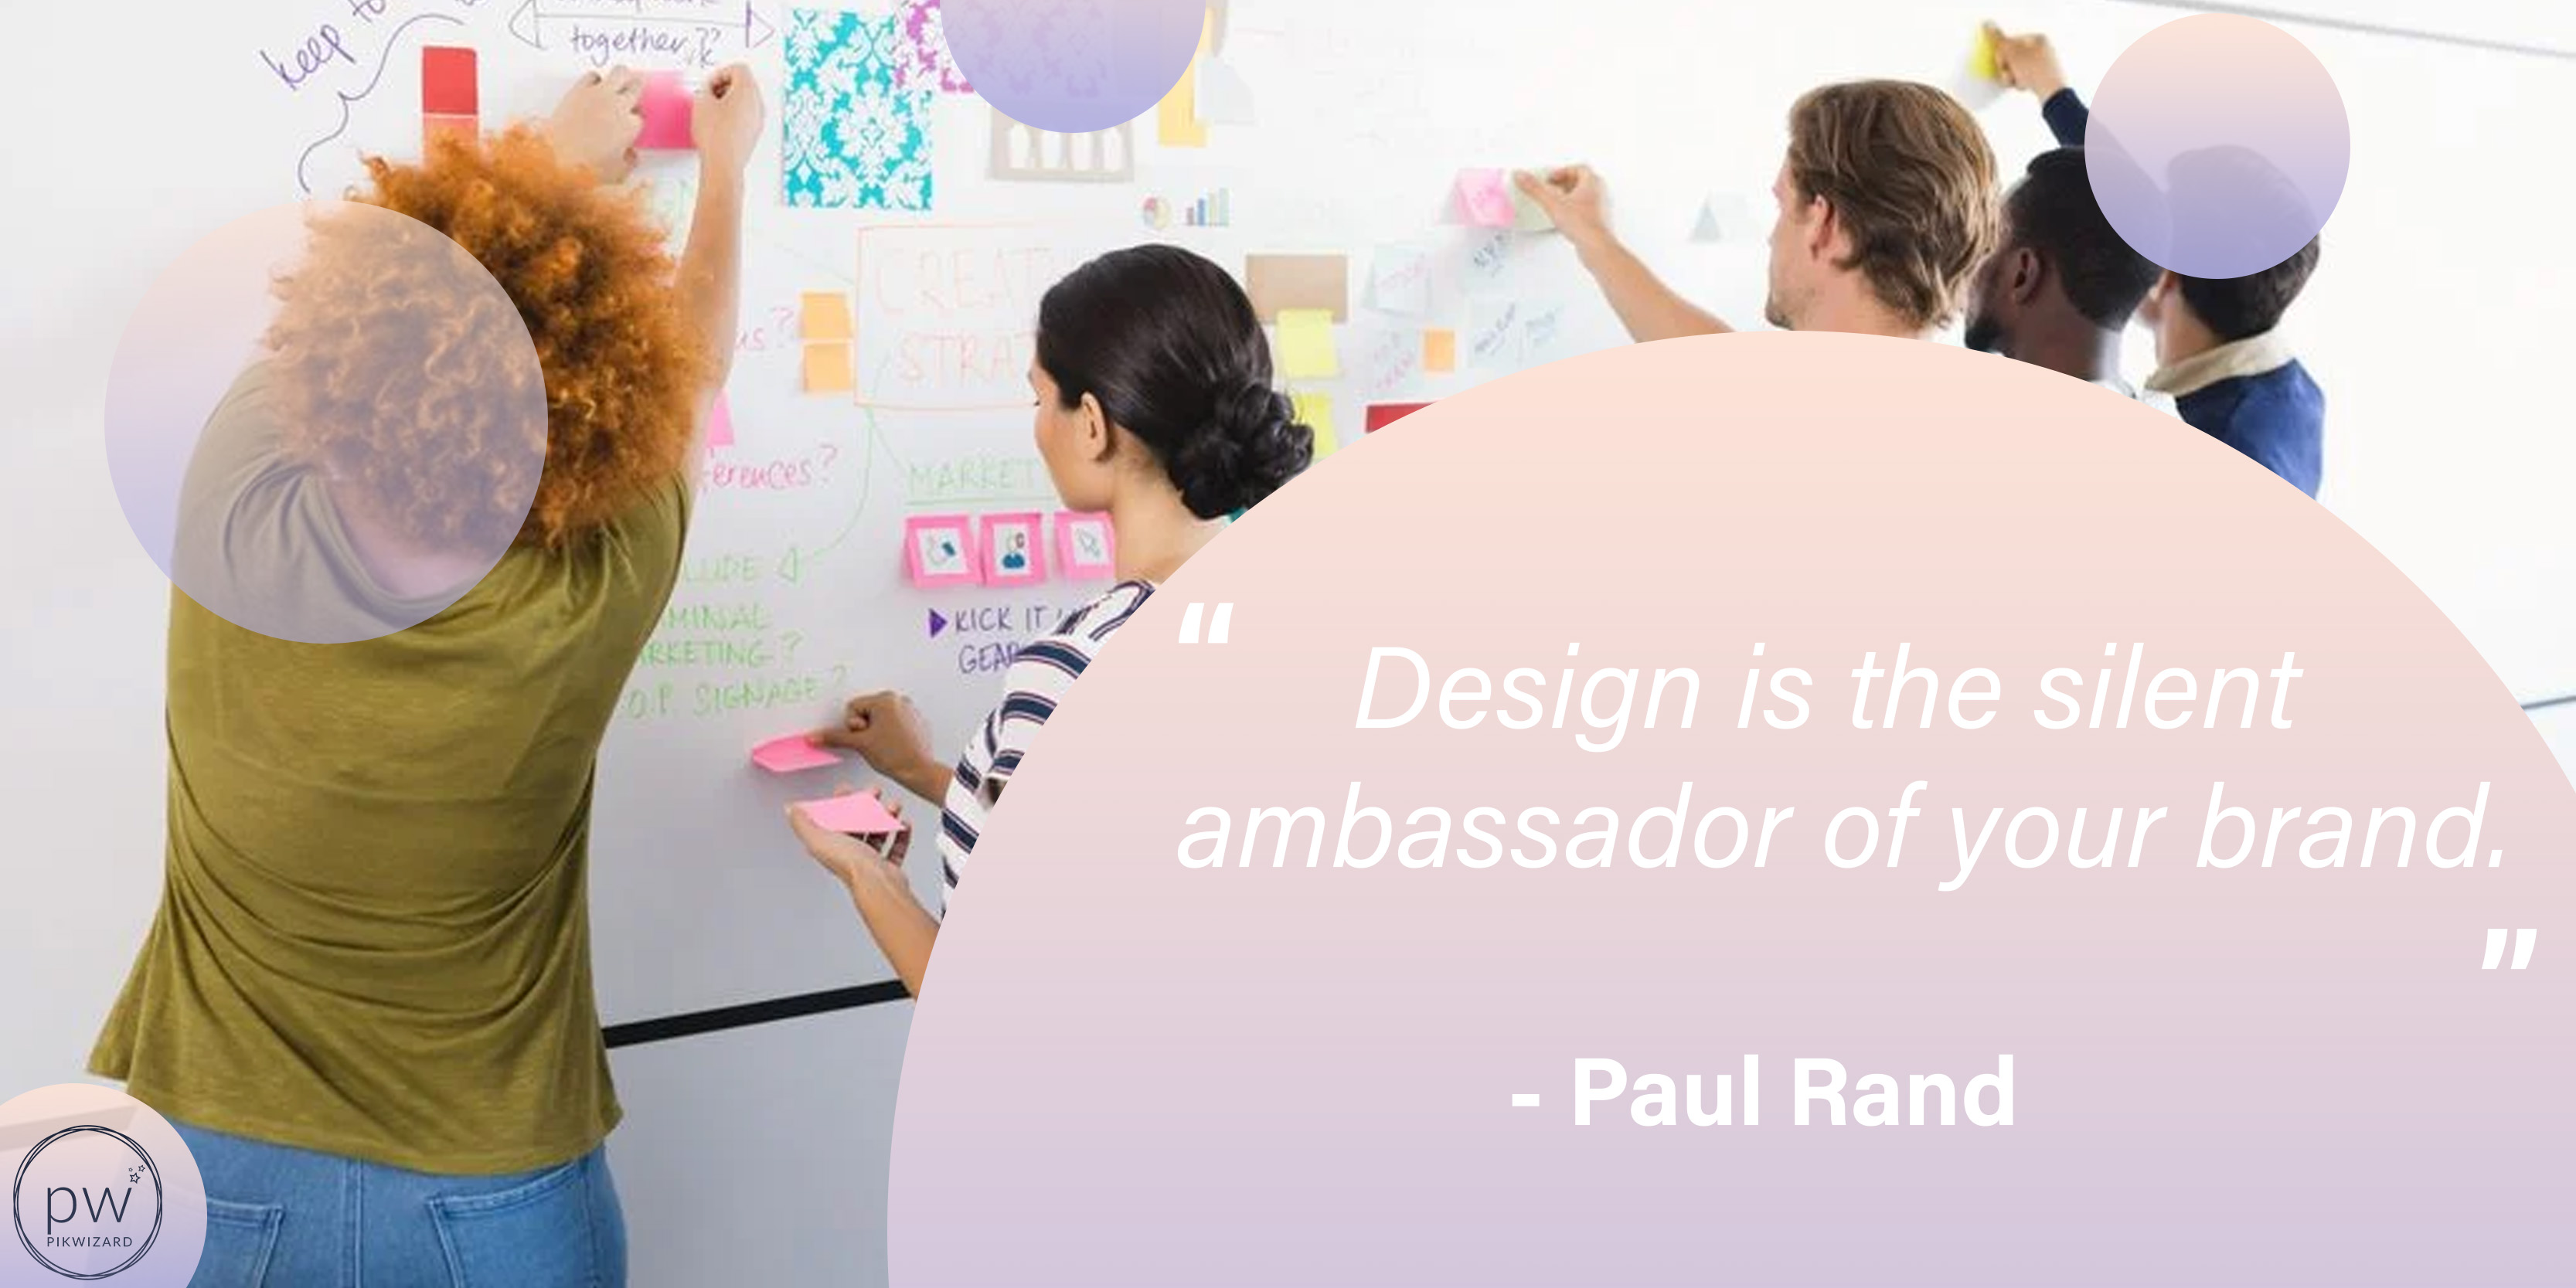 Paul Rand quote with an image of a graphic design team working on a white board - Convey brand identity through product aesthetics - Image